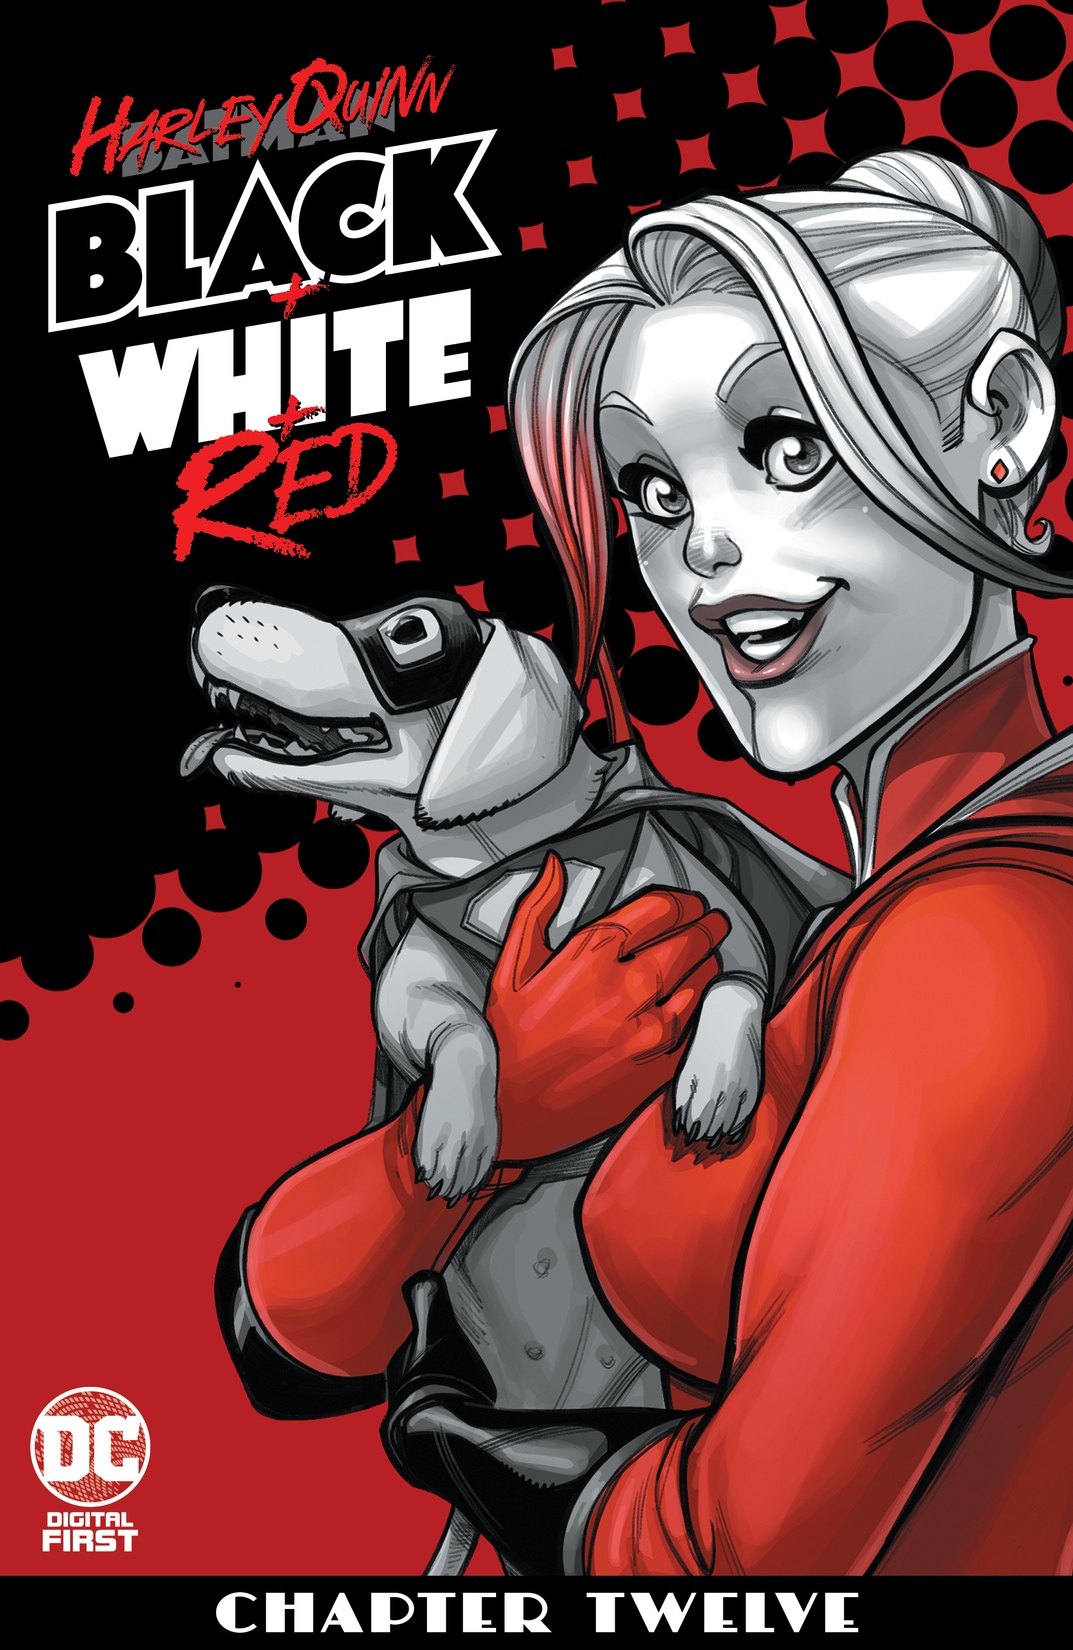 Harley Quinn Black + White + Red #12 preview images